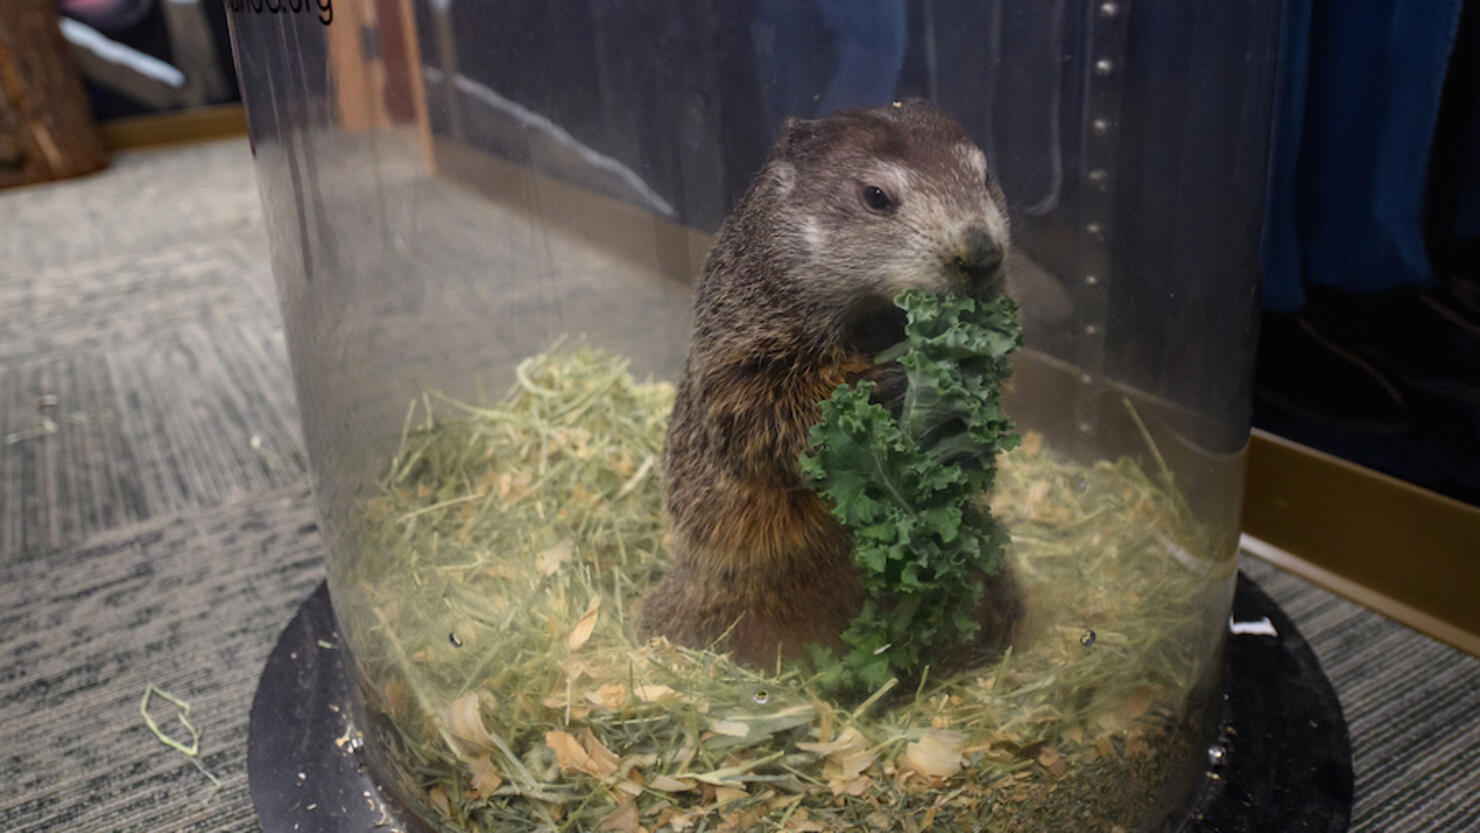 Annual Groundhog's Day Tradition In Punxsutawney, Pennsylvania Will Take Place Without The Usual Crowd